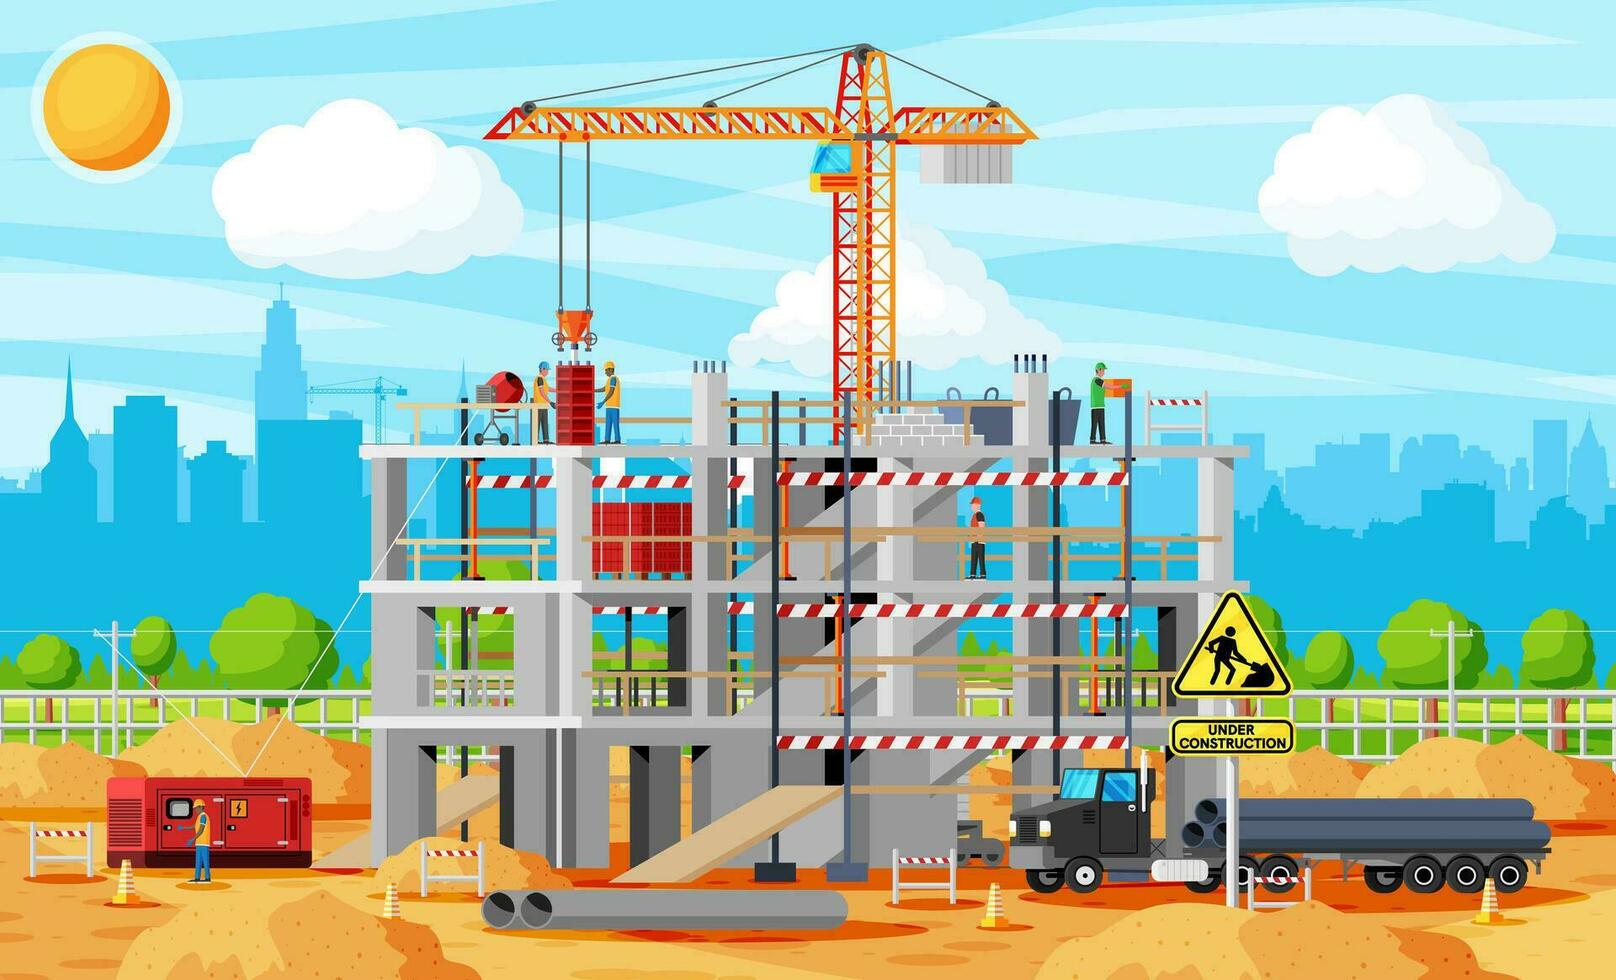 Construction Site Banner. Truck car, Workers, Concrete Piles, Tower Crane. Under Construction Design Background. Building Materials and Equipment. Cityscape, Skyline. Cartoon Flat Vector Illustration